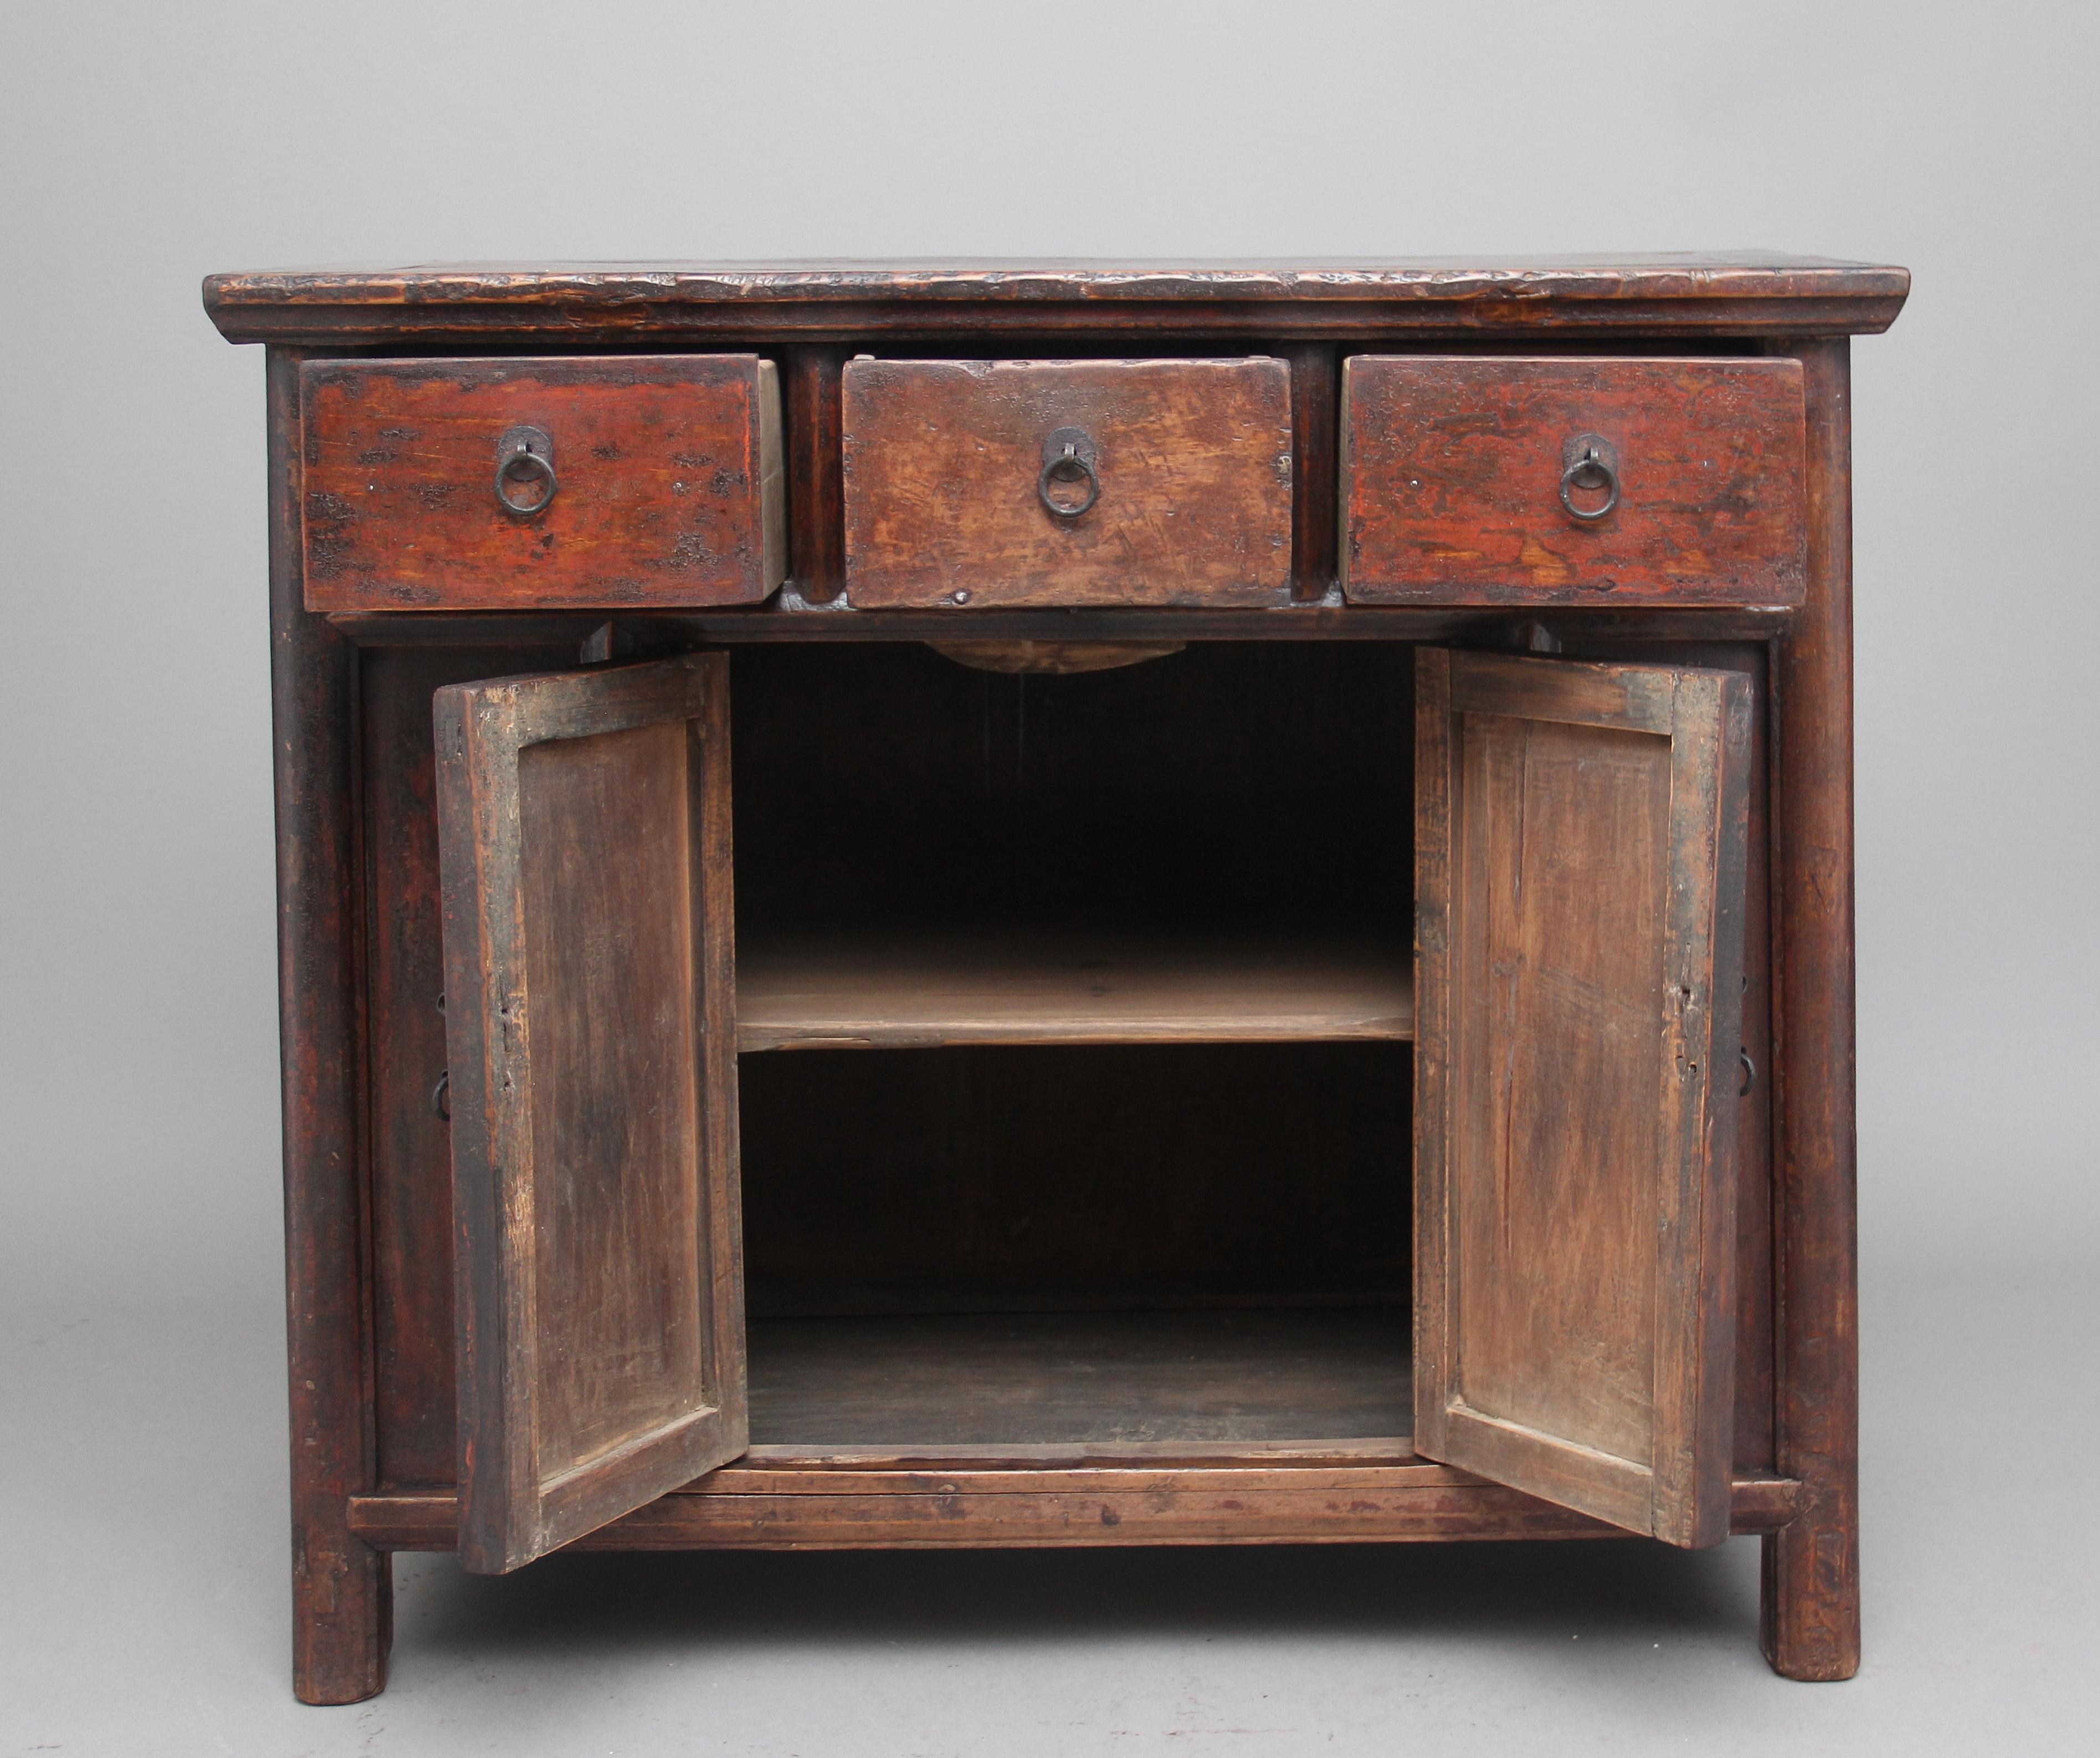 19th century Chinese rustic elm dresser, having three drawers above a two door cupboard opening to reveal a fixed single shelf inside, the drawers and doors having original brass ring pull handles, nice rustic mouldings, the cabinet having the